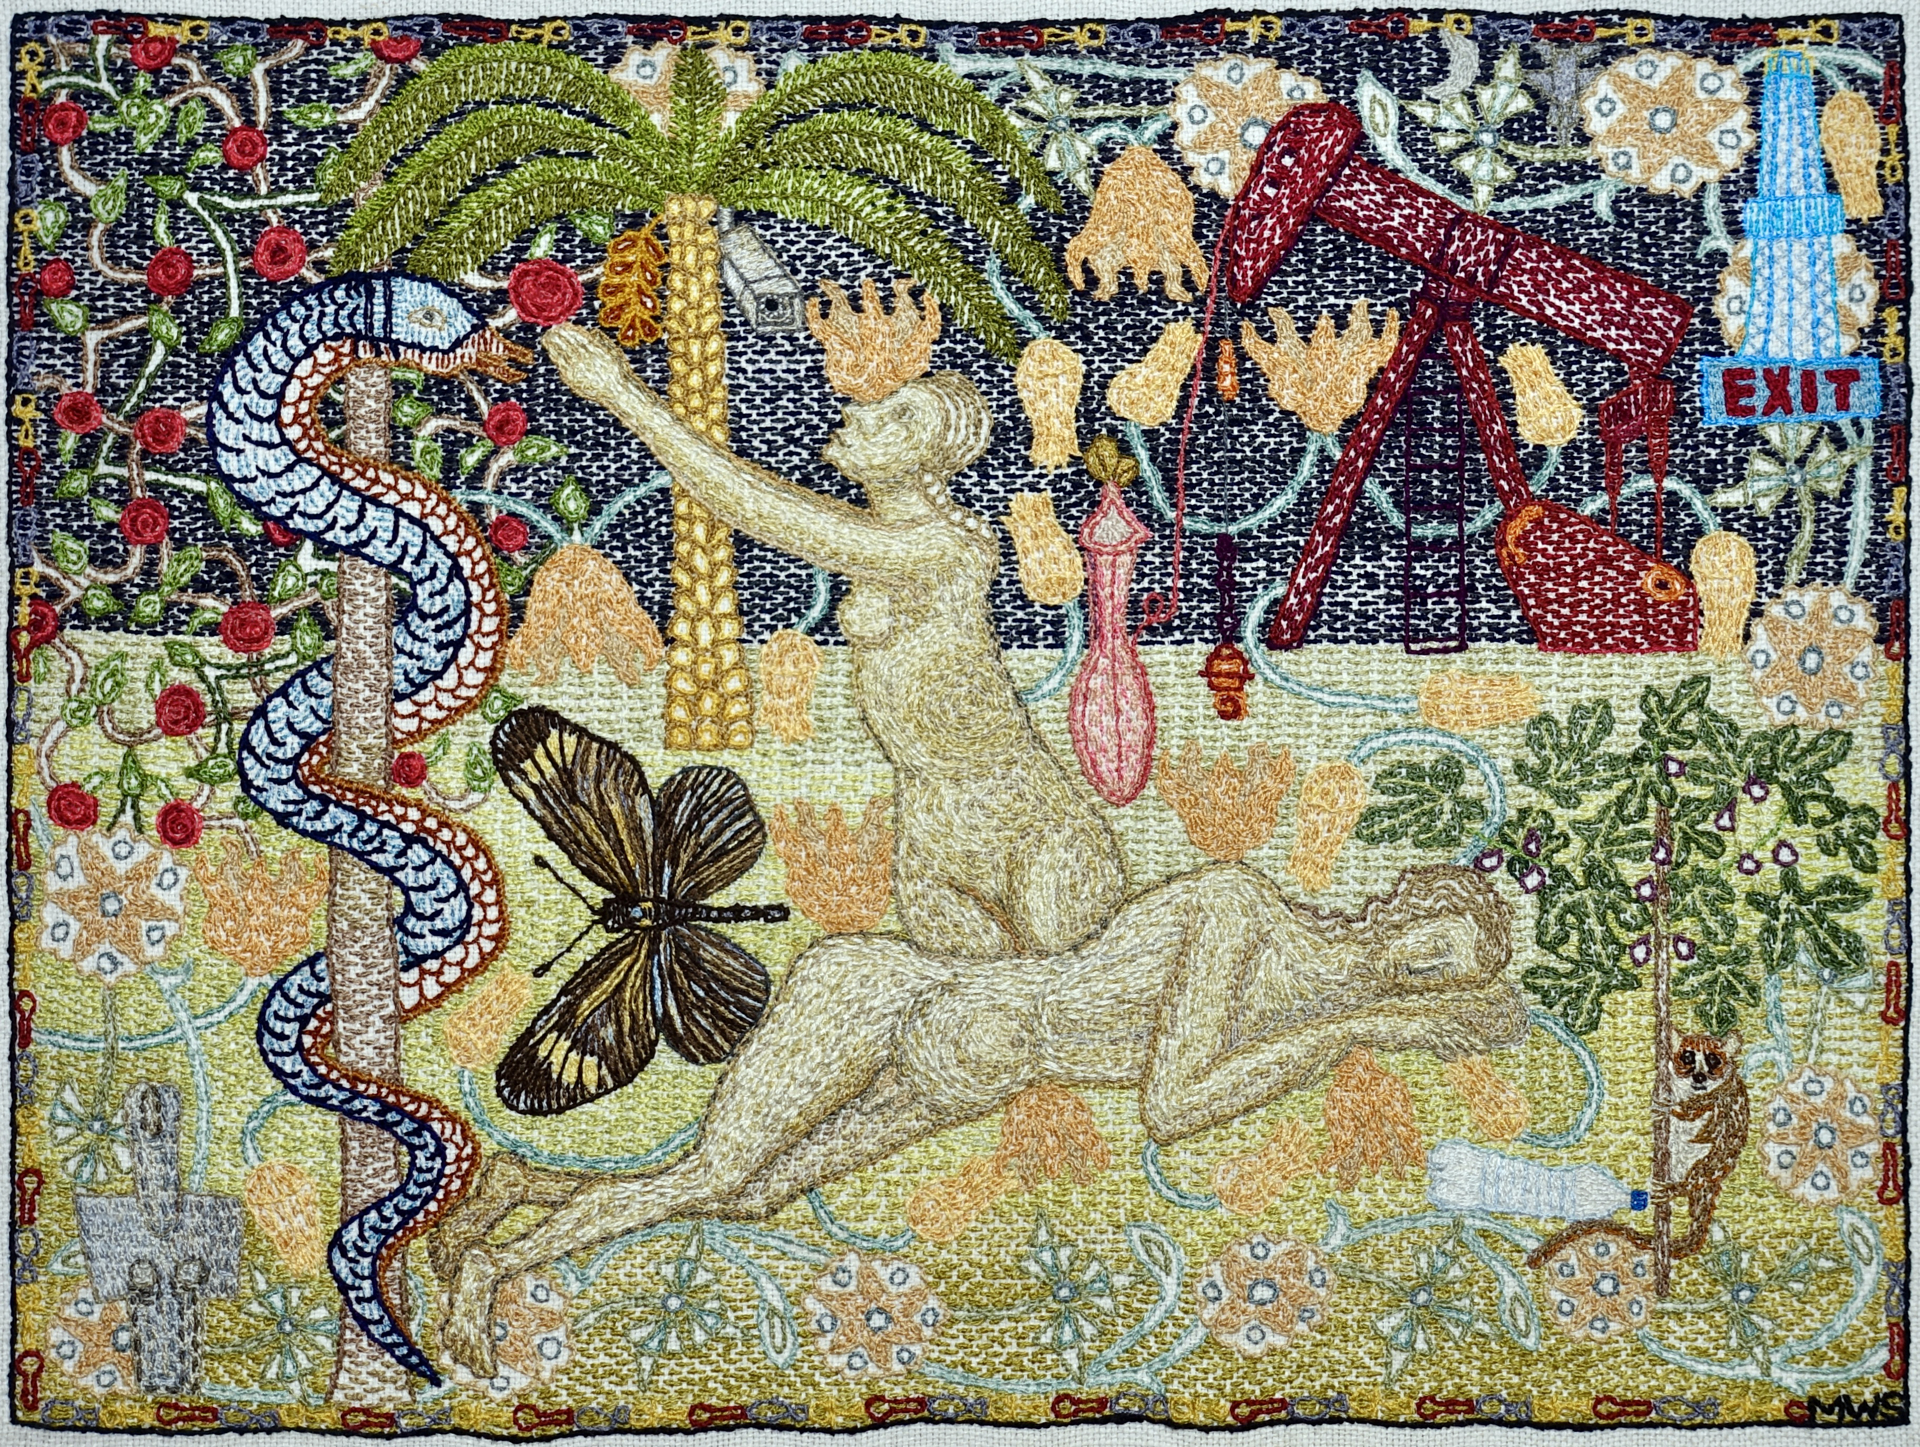 Intricate "stitch-work painting" by artist Martha Shade, depicting Adam and Eve in the garden of Eden, as a contemplation on humanity's relationship with the environment and femininity.